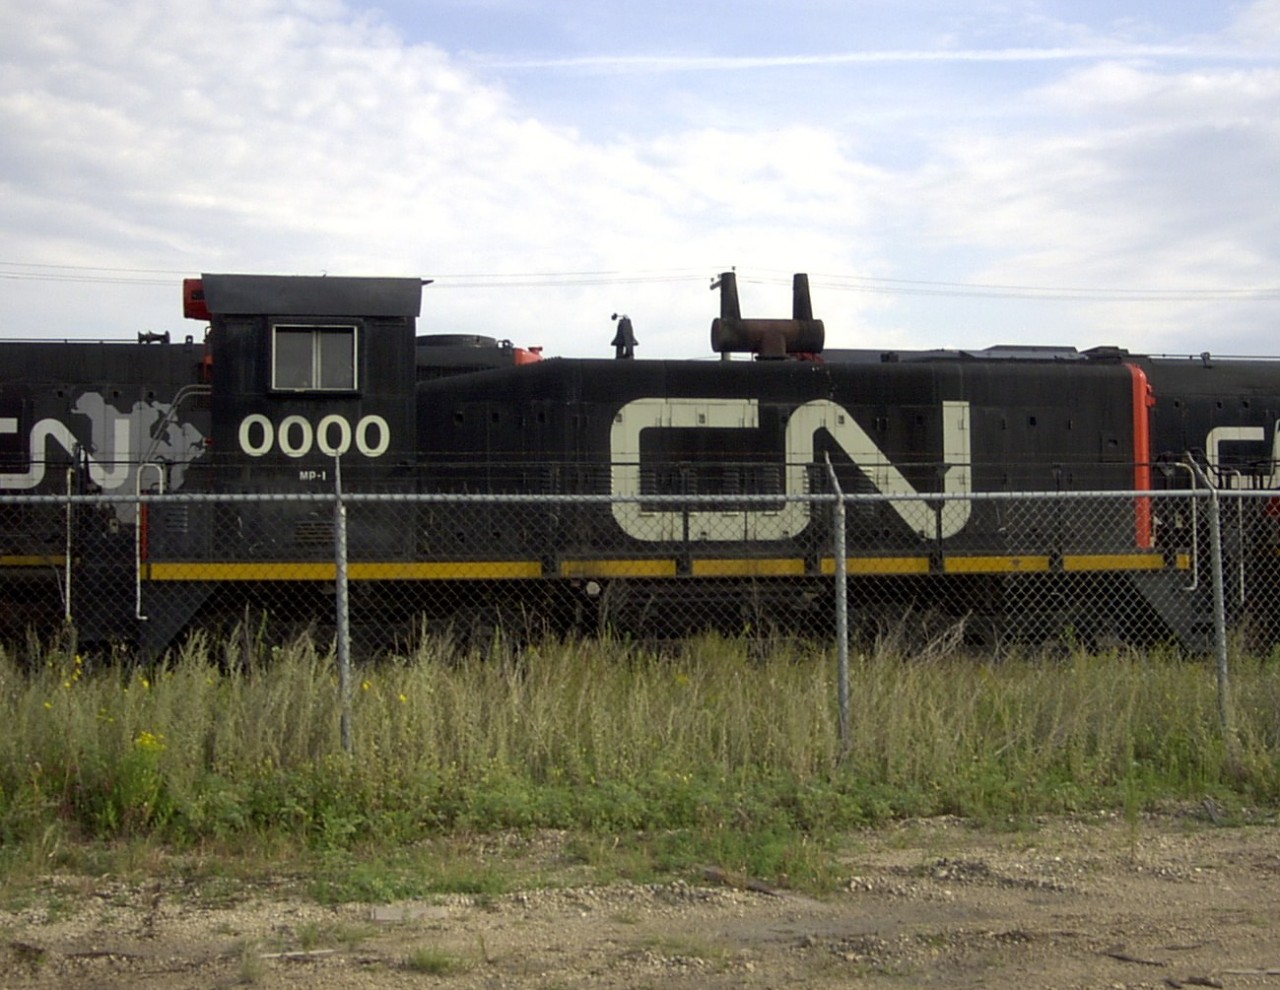 [Editors note - accepted for equipment rarity] CN 0000 sitting idle just outside the fenced compound of CN's Transcona Work Equipment Repair Facility.